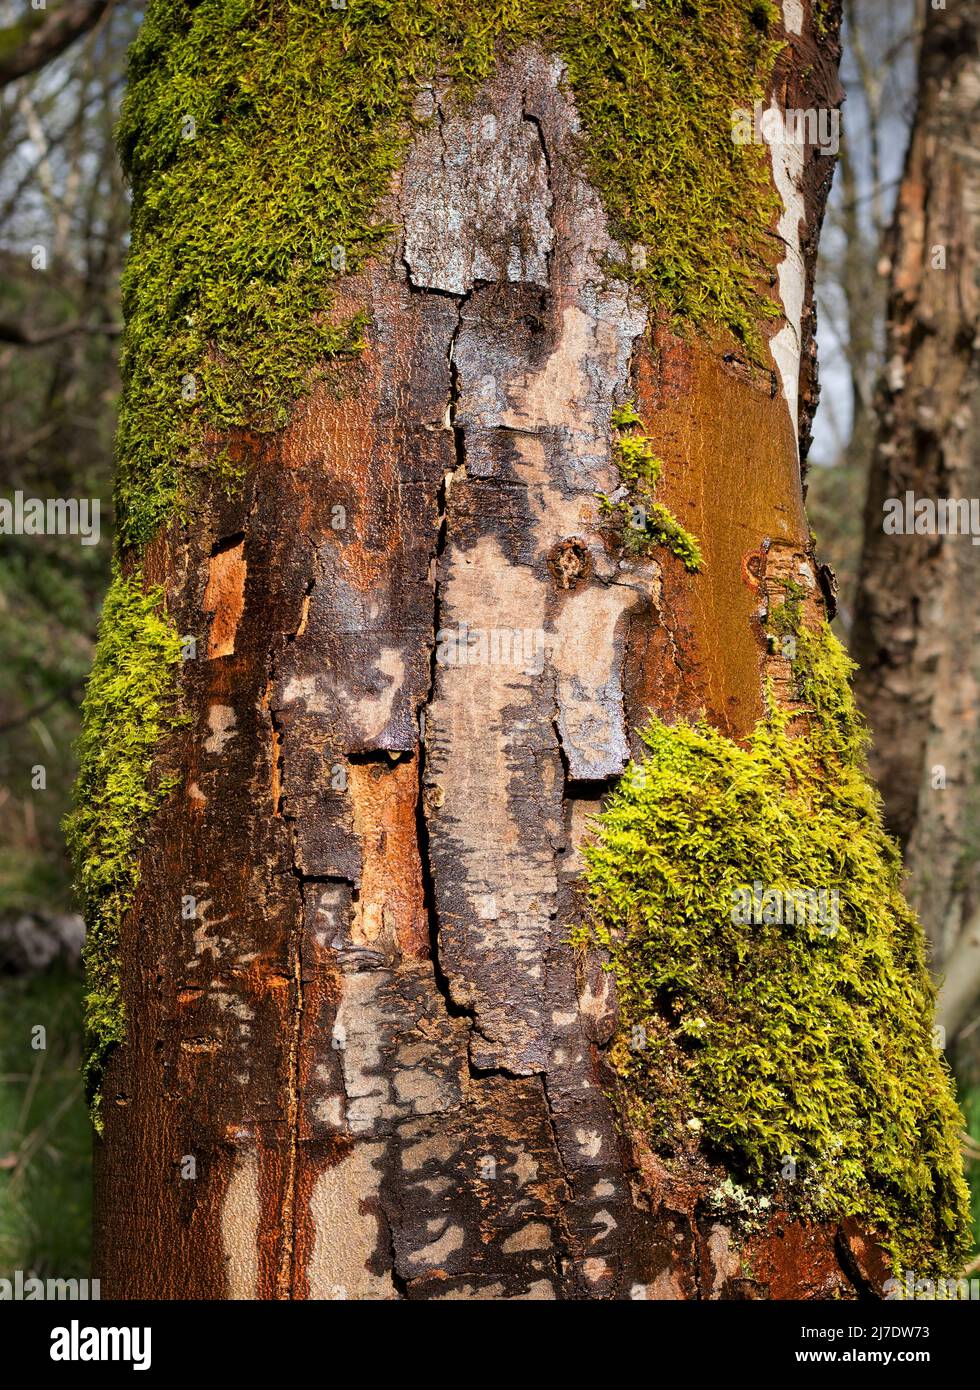 A section of the trunk of a tree, showing the back pattern, colours and textures after rain Stock Photo